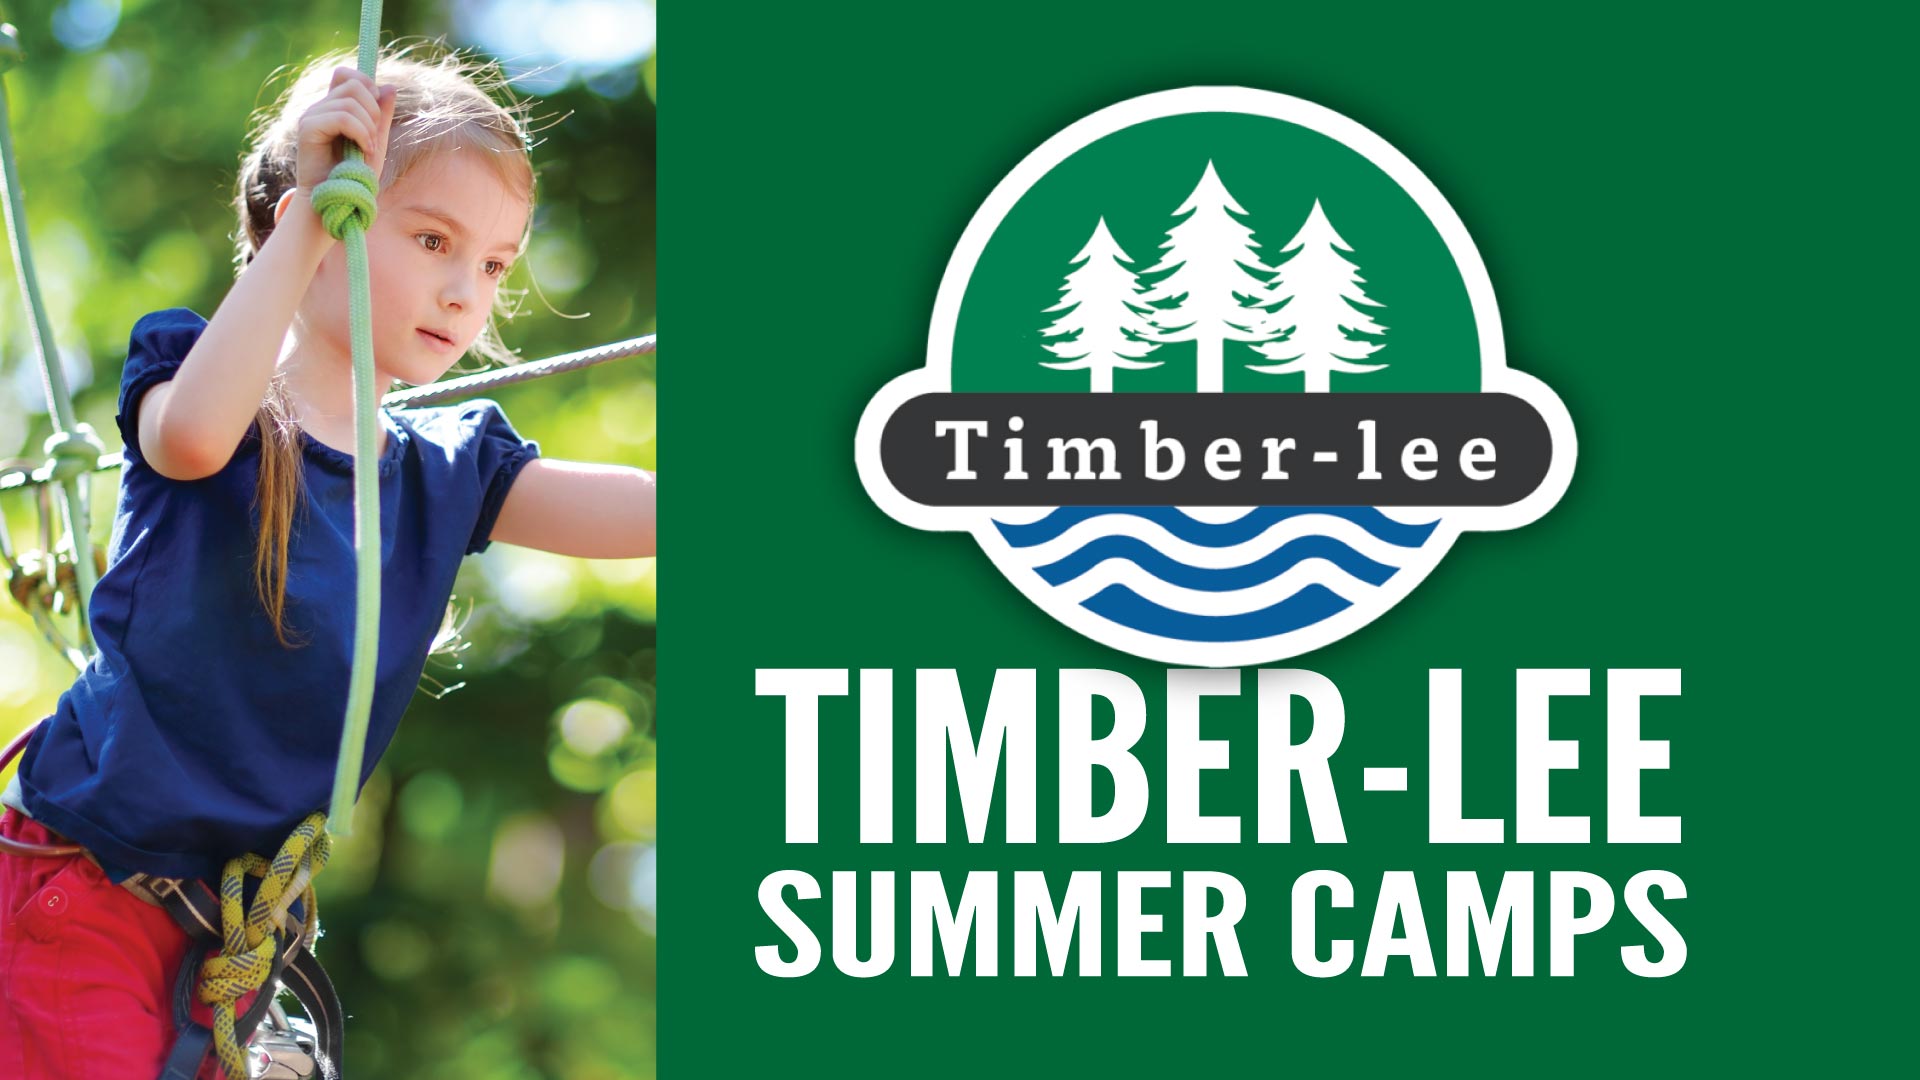 CompassKids Camp Timber-lee Overnight Camp | The Compass Church